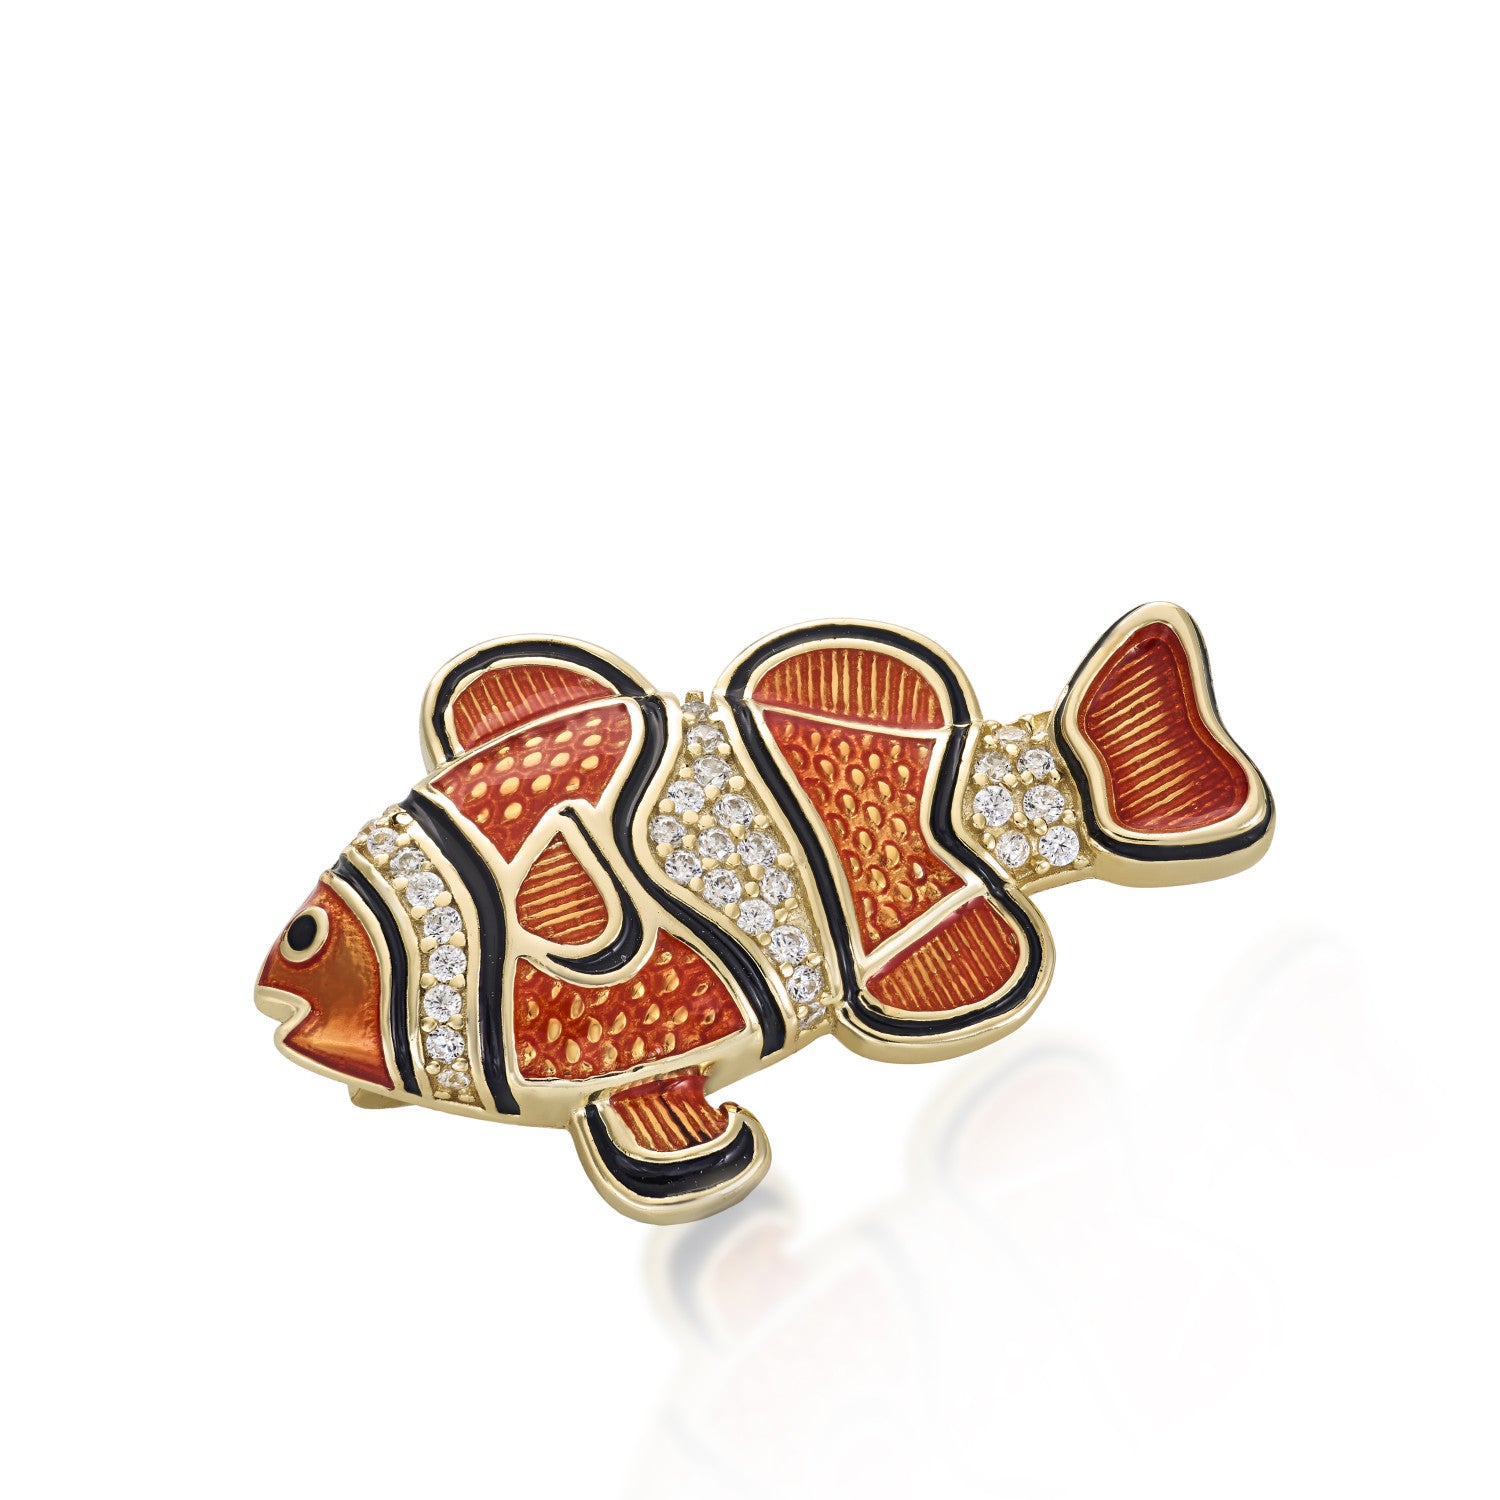 Gold plated silver brooch with clown fish design